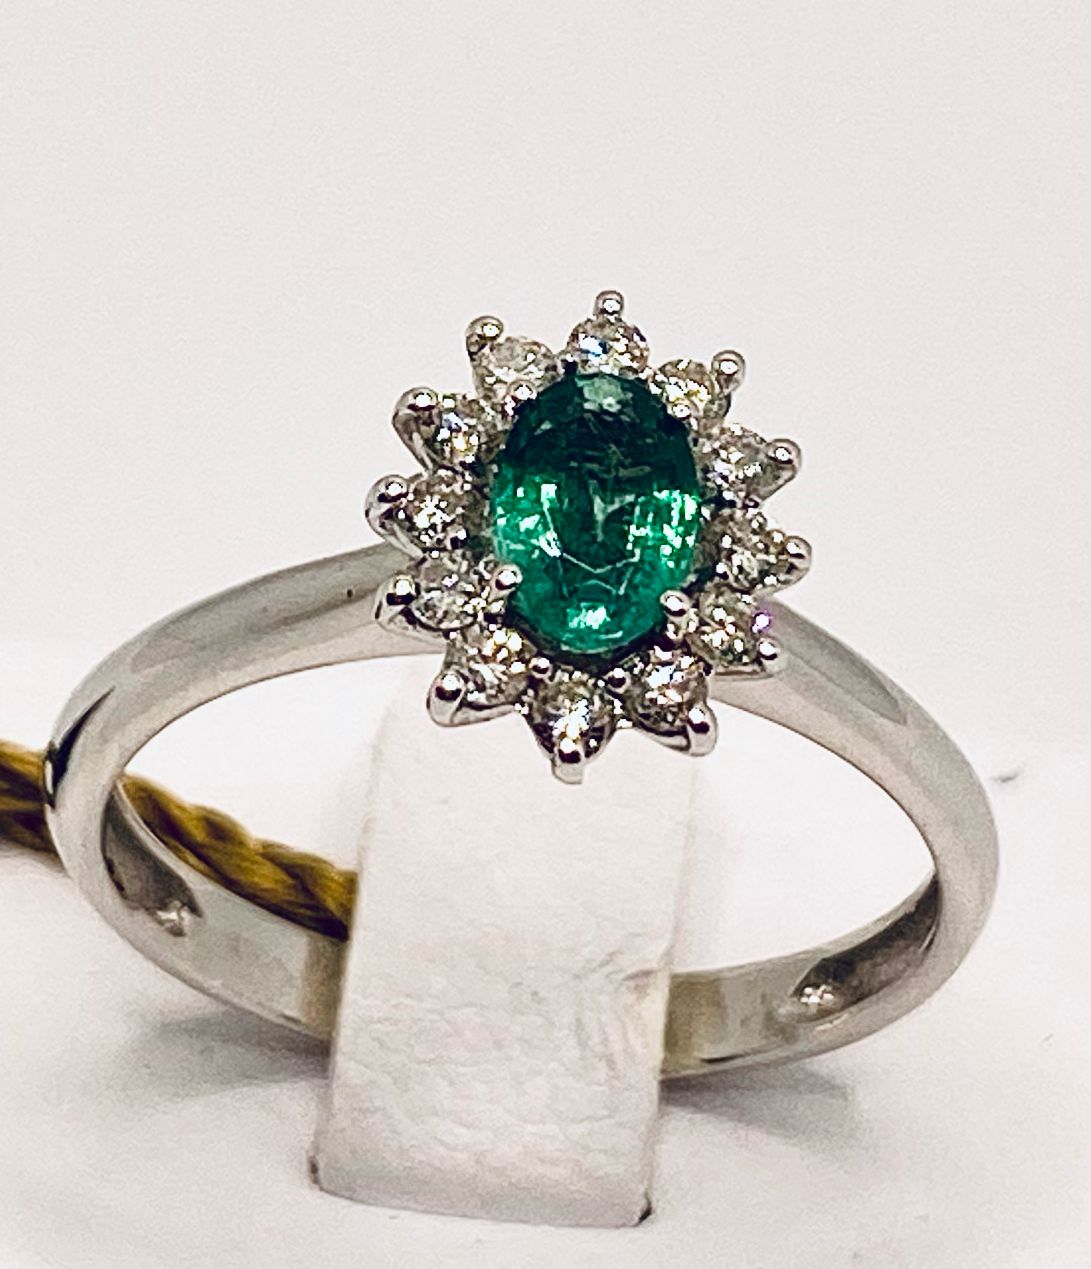 Ring with emerald and diamonds art.AN1368